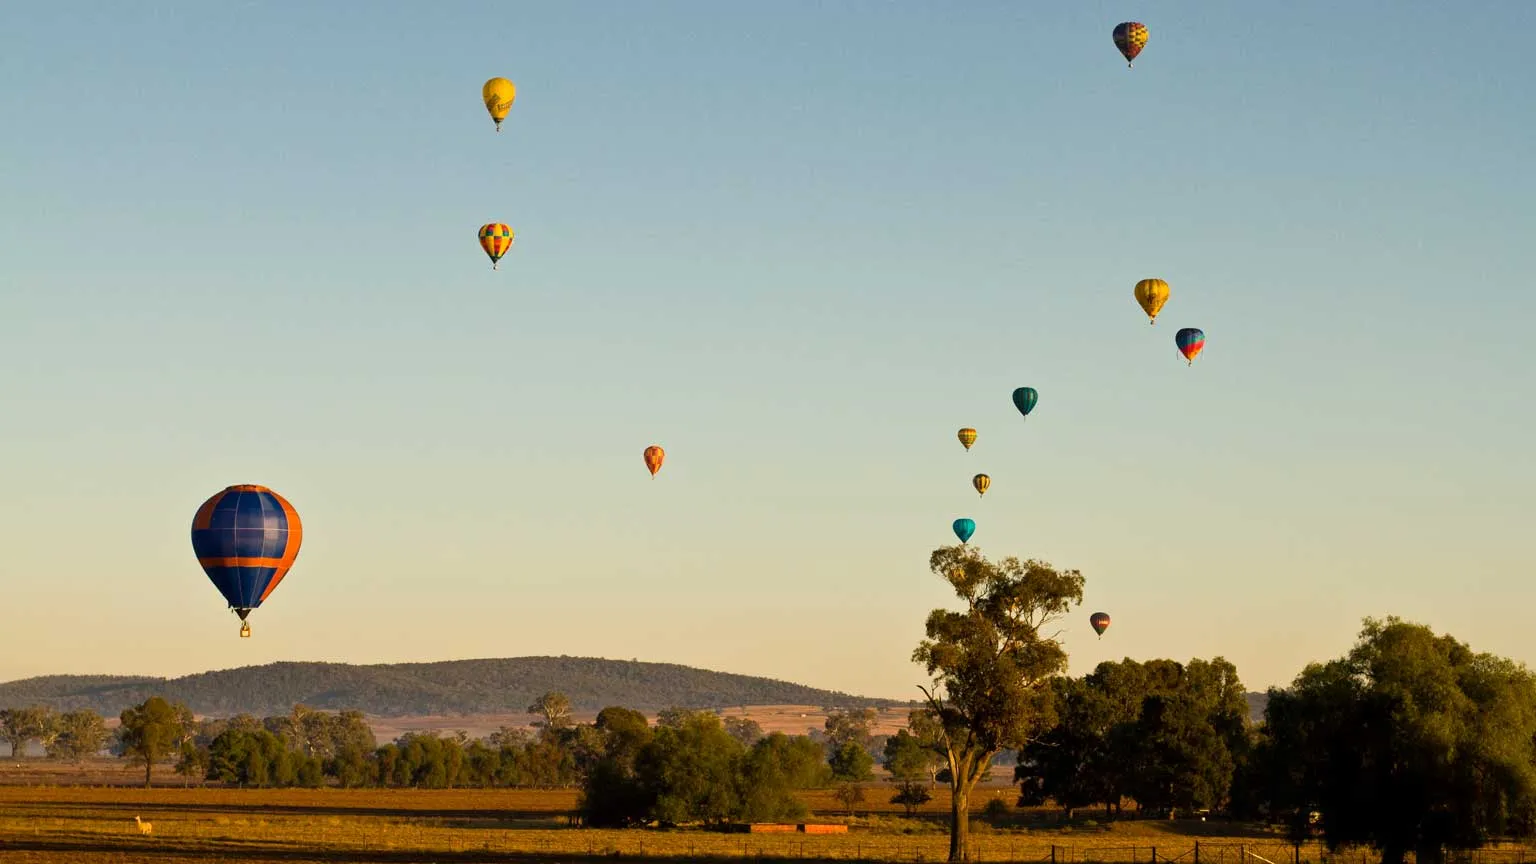 Australian Hot Air Ballooning Championship held in Canowindra, and it shows balloons approaching one of designated targets during morning flight.